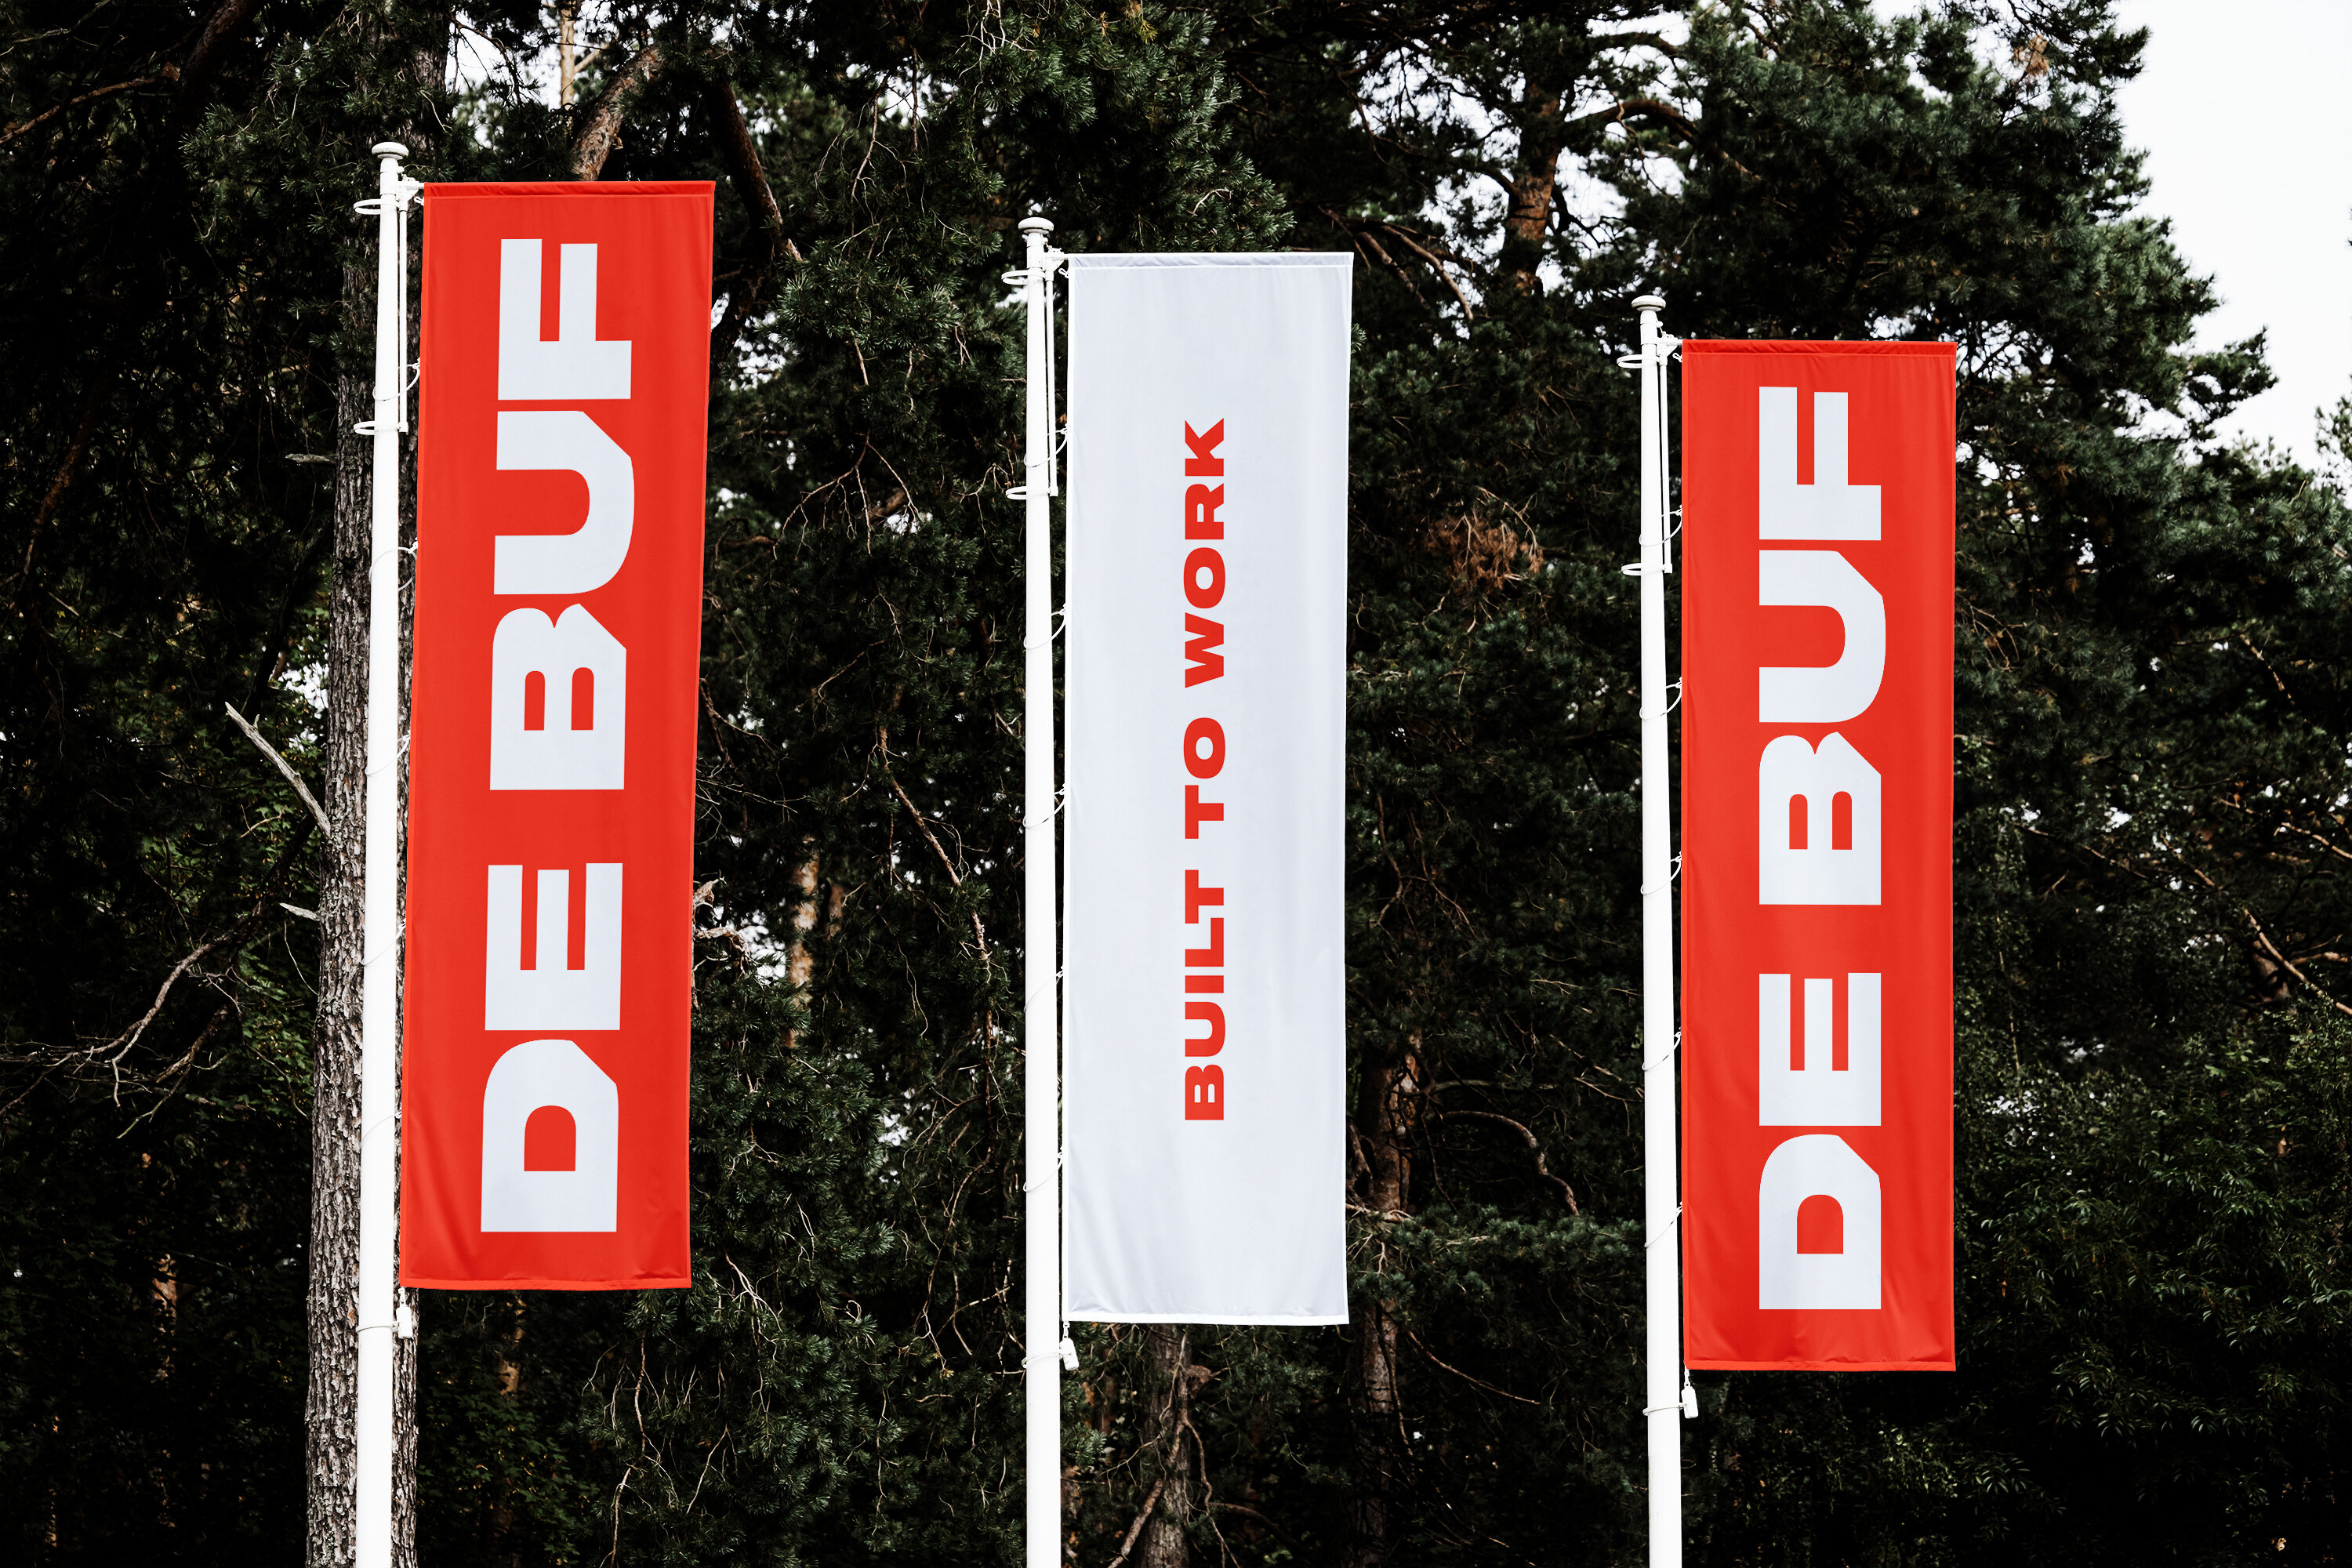 Debuf flags